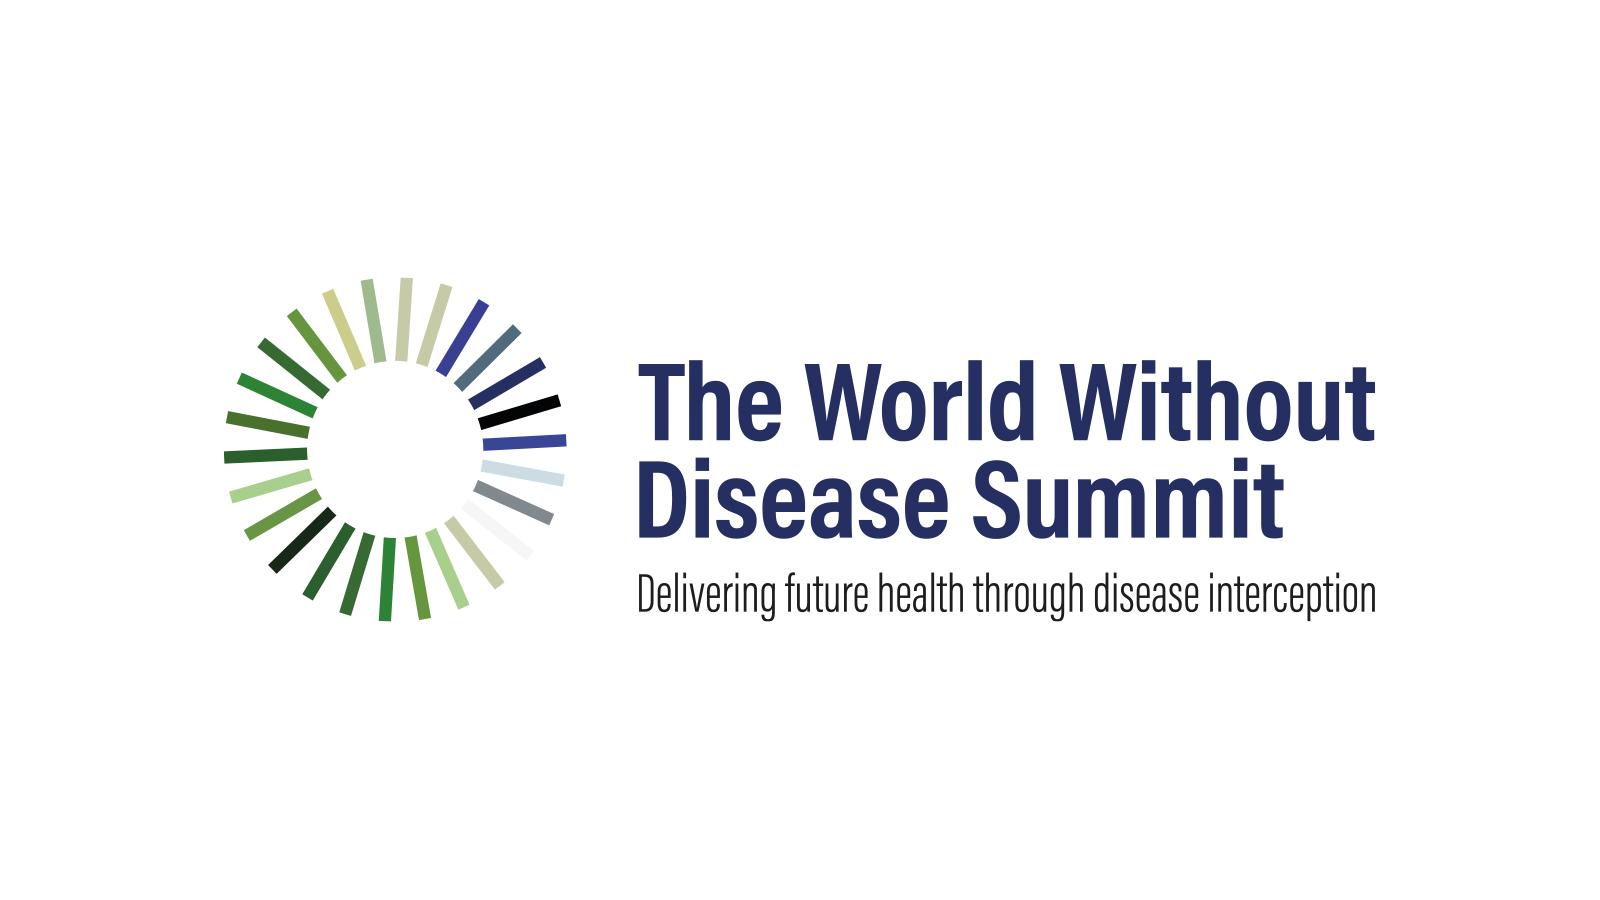 The World Without Disease Summit